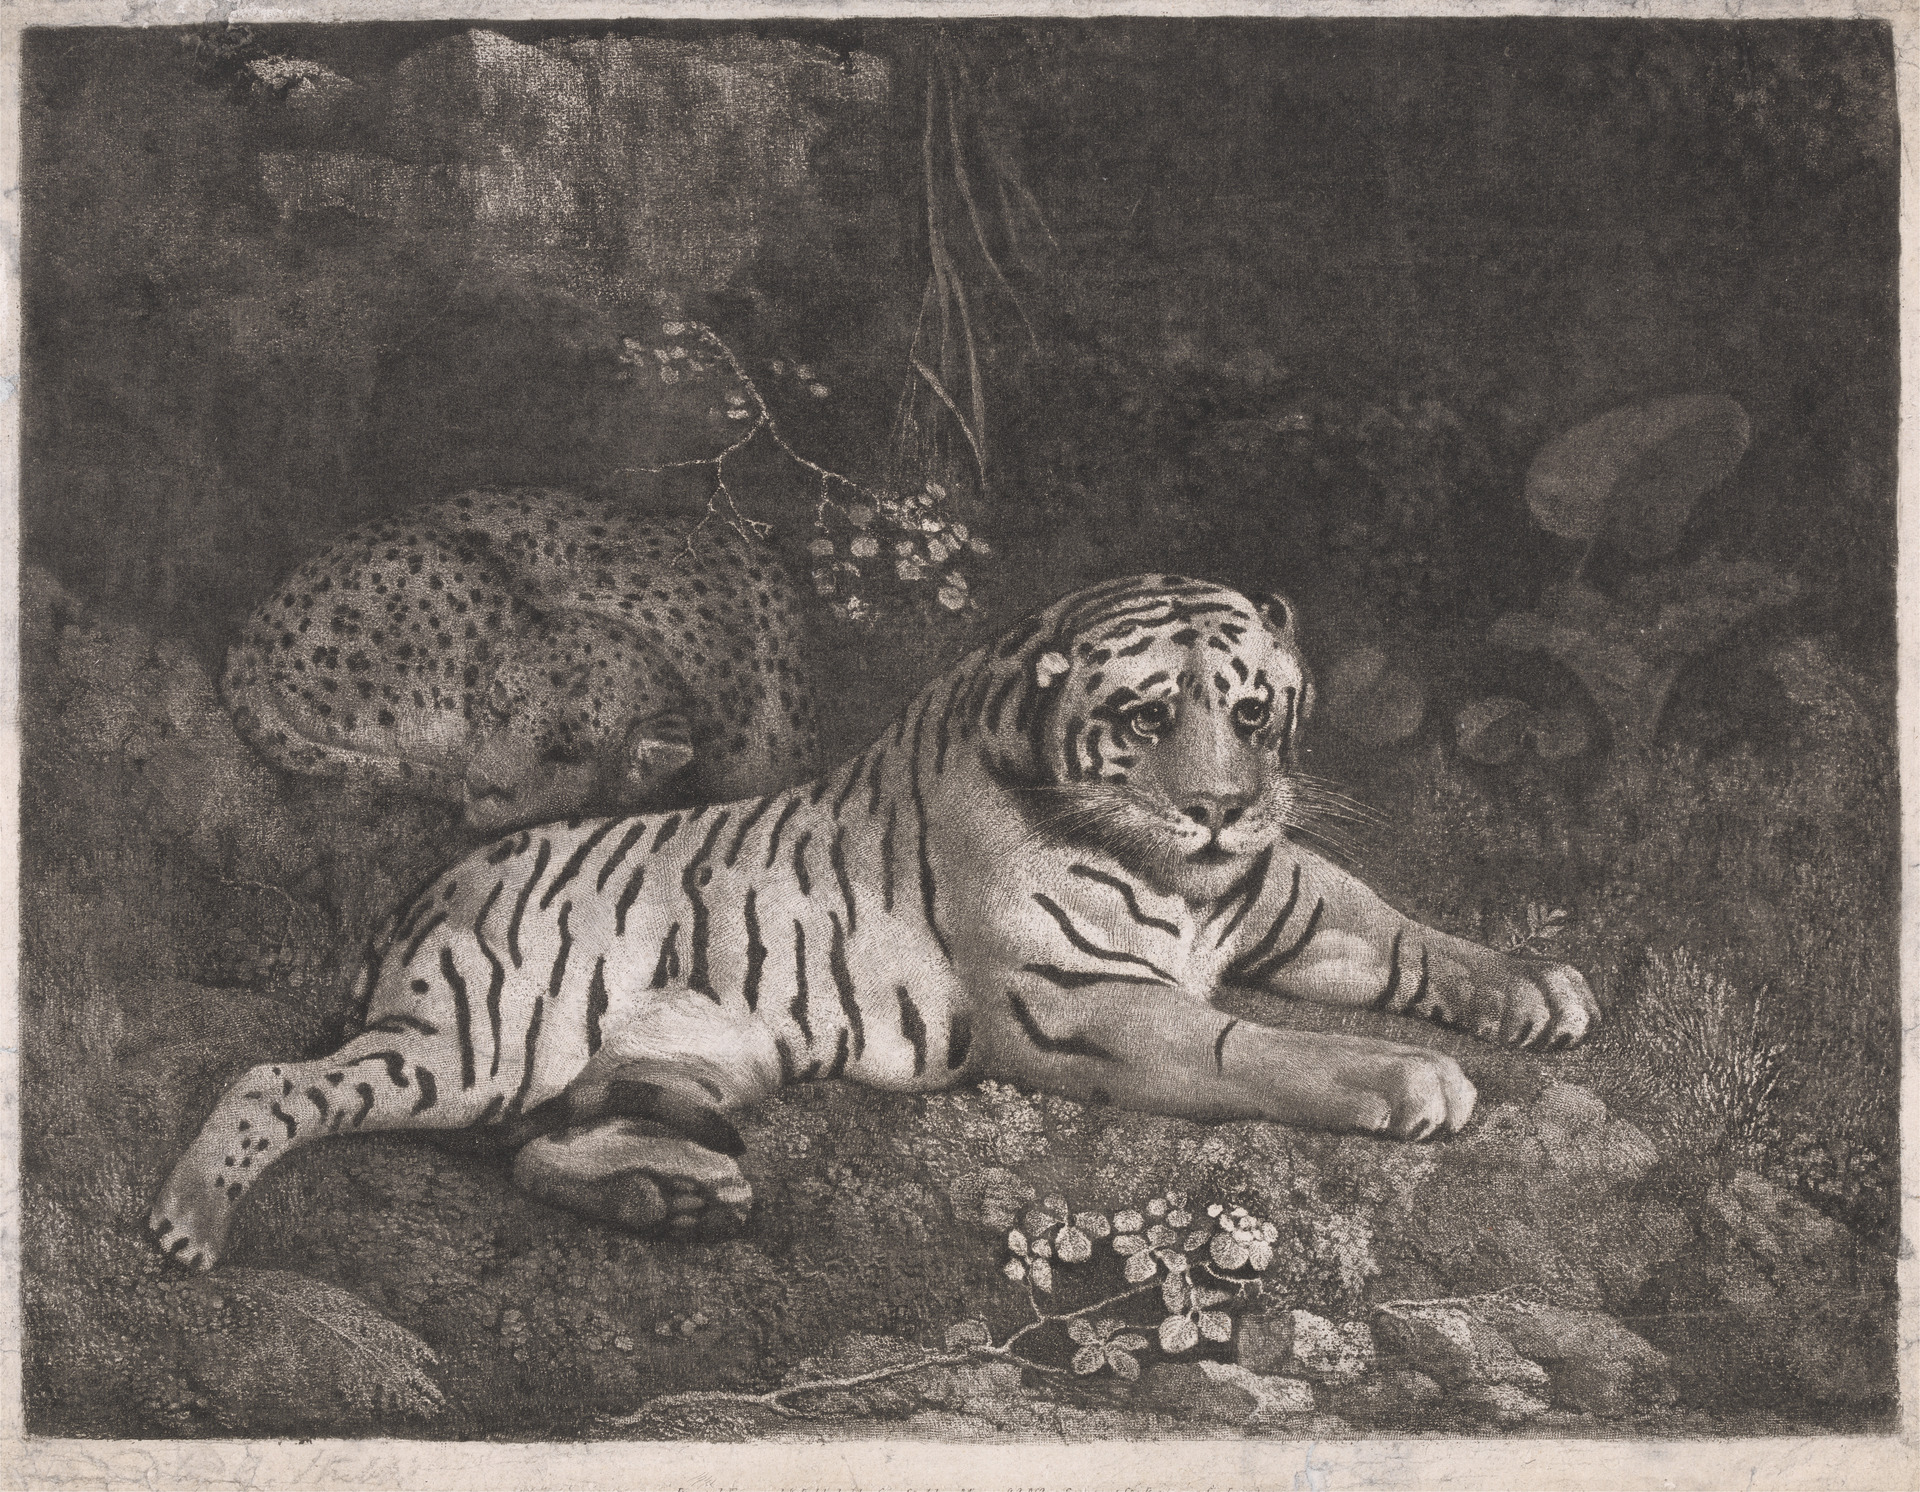 Print made by George Stubbs. A Tiger and a Sleeping Leopard. 1788. 